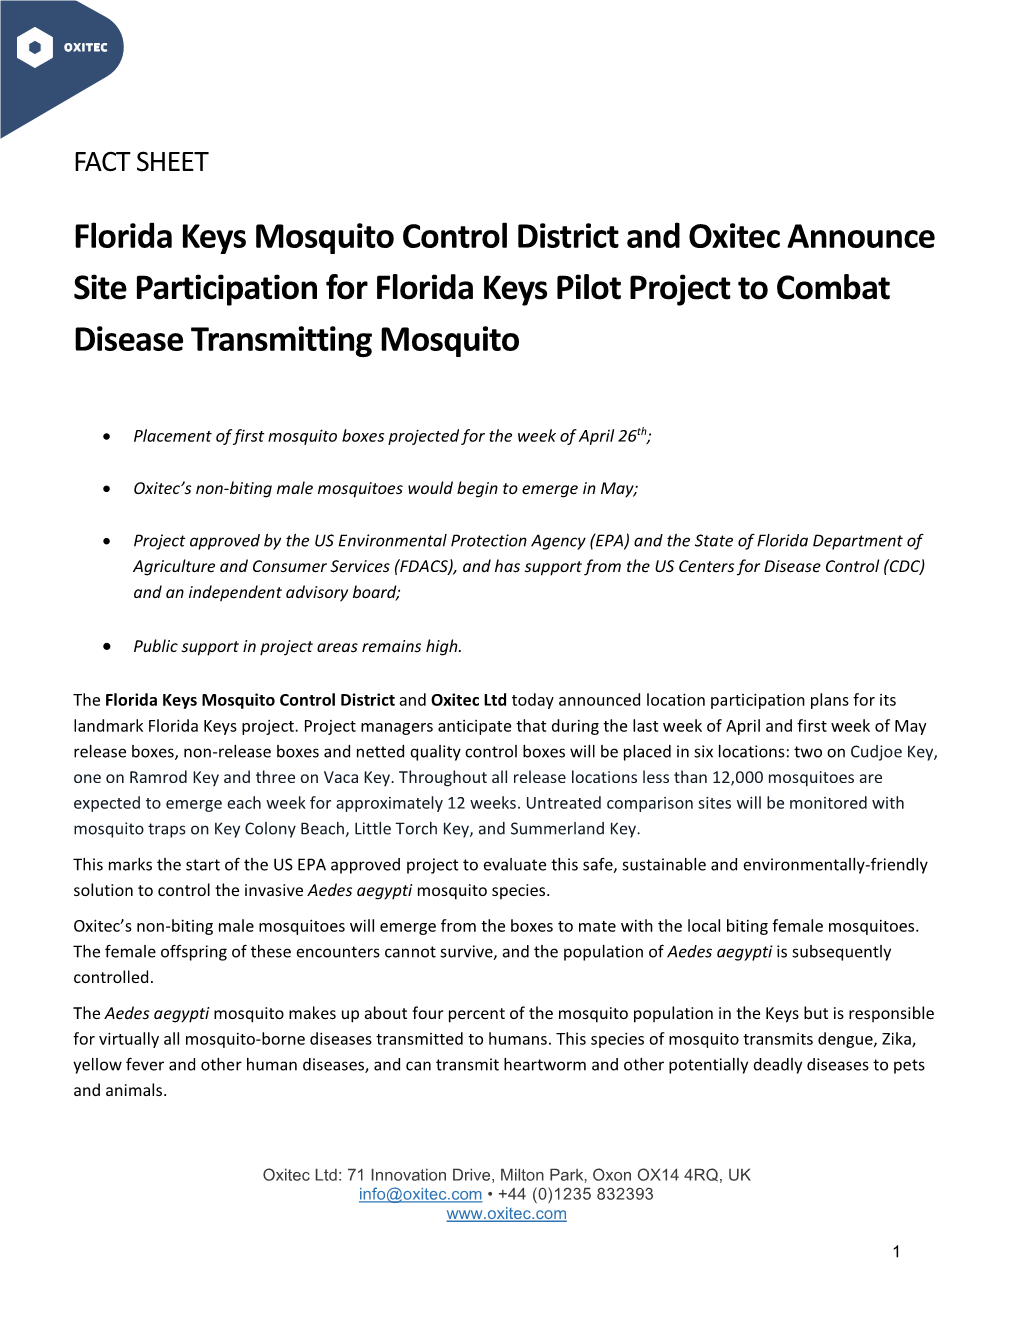 Florida Keys Mosquito Control District and Oxitec Announce Site Participation for Florida Keys Pilot Project to Combat Disease Transmitting Mosquito